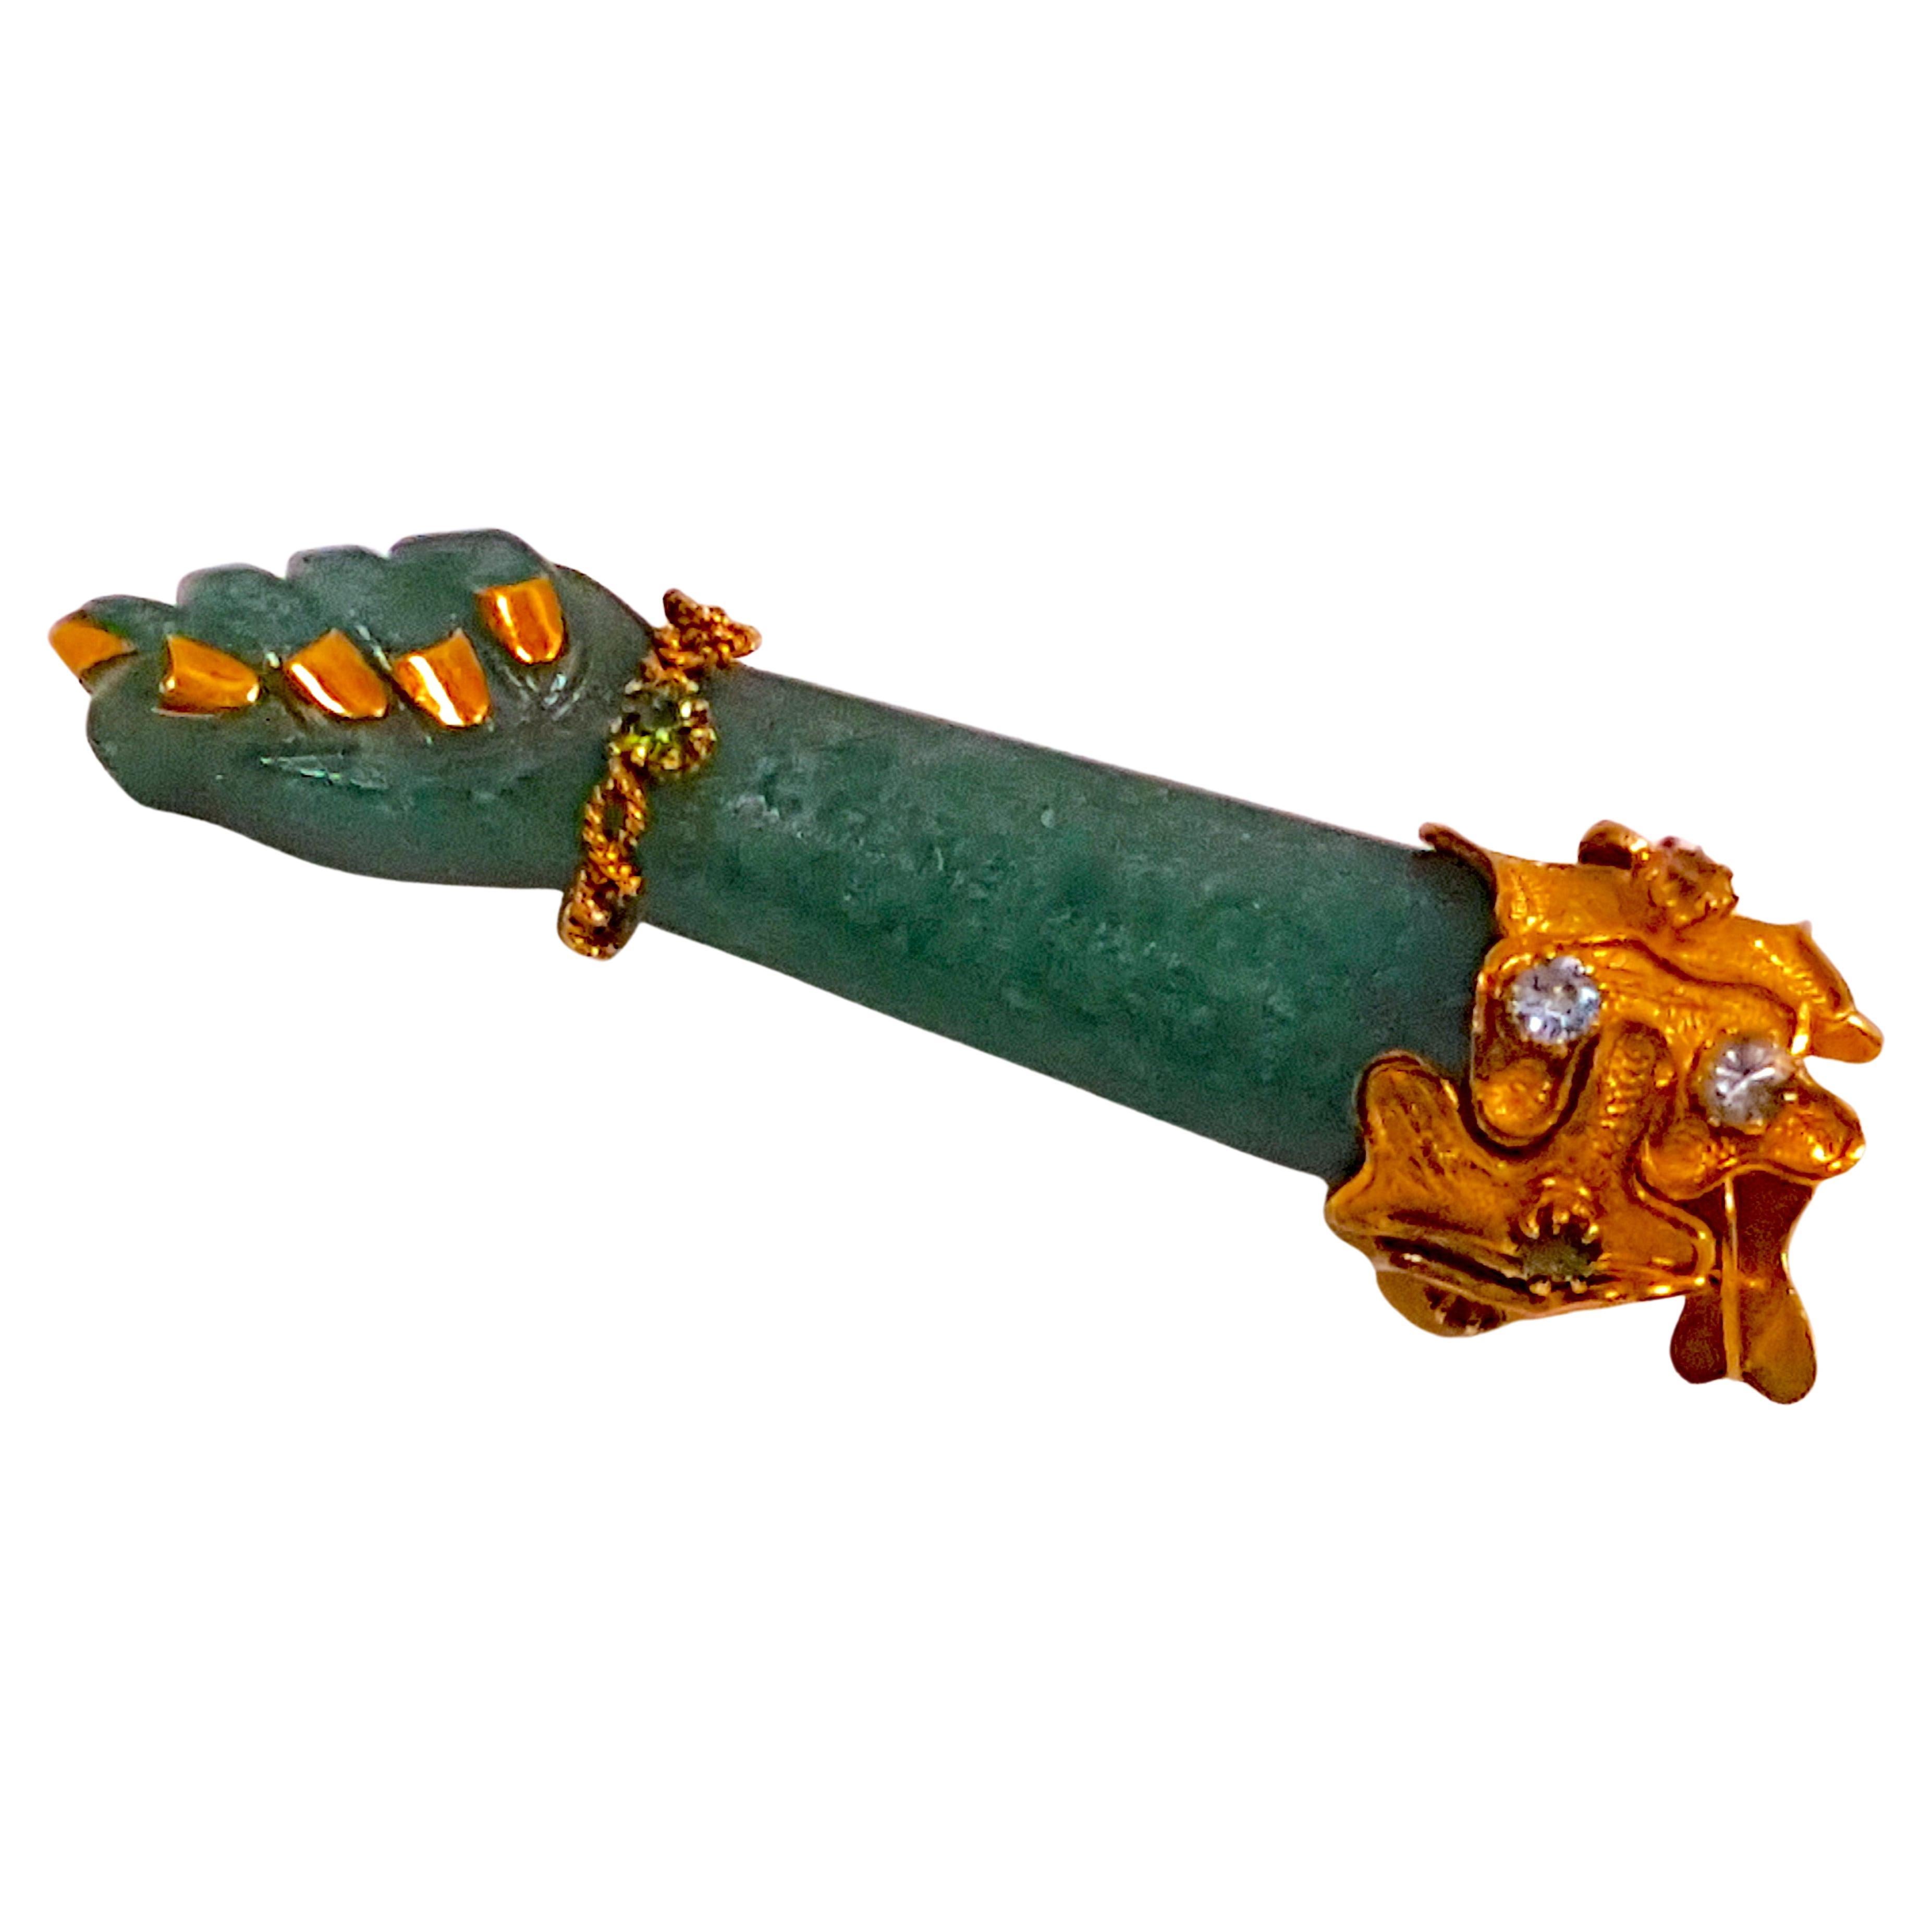 With elements of the cross-over late-Arts&Crafts and early-Art-Nouveau movements, this antique turn-of-the-century mottled-green jade amulet pendant is elaborately decorated in a Baroque-Revival style with 18K yellow gold, as well as with 10